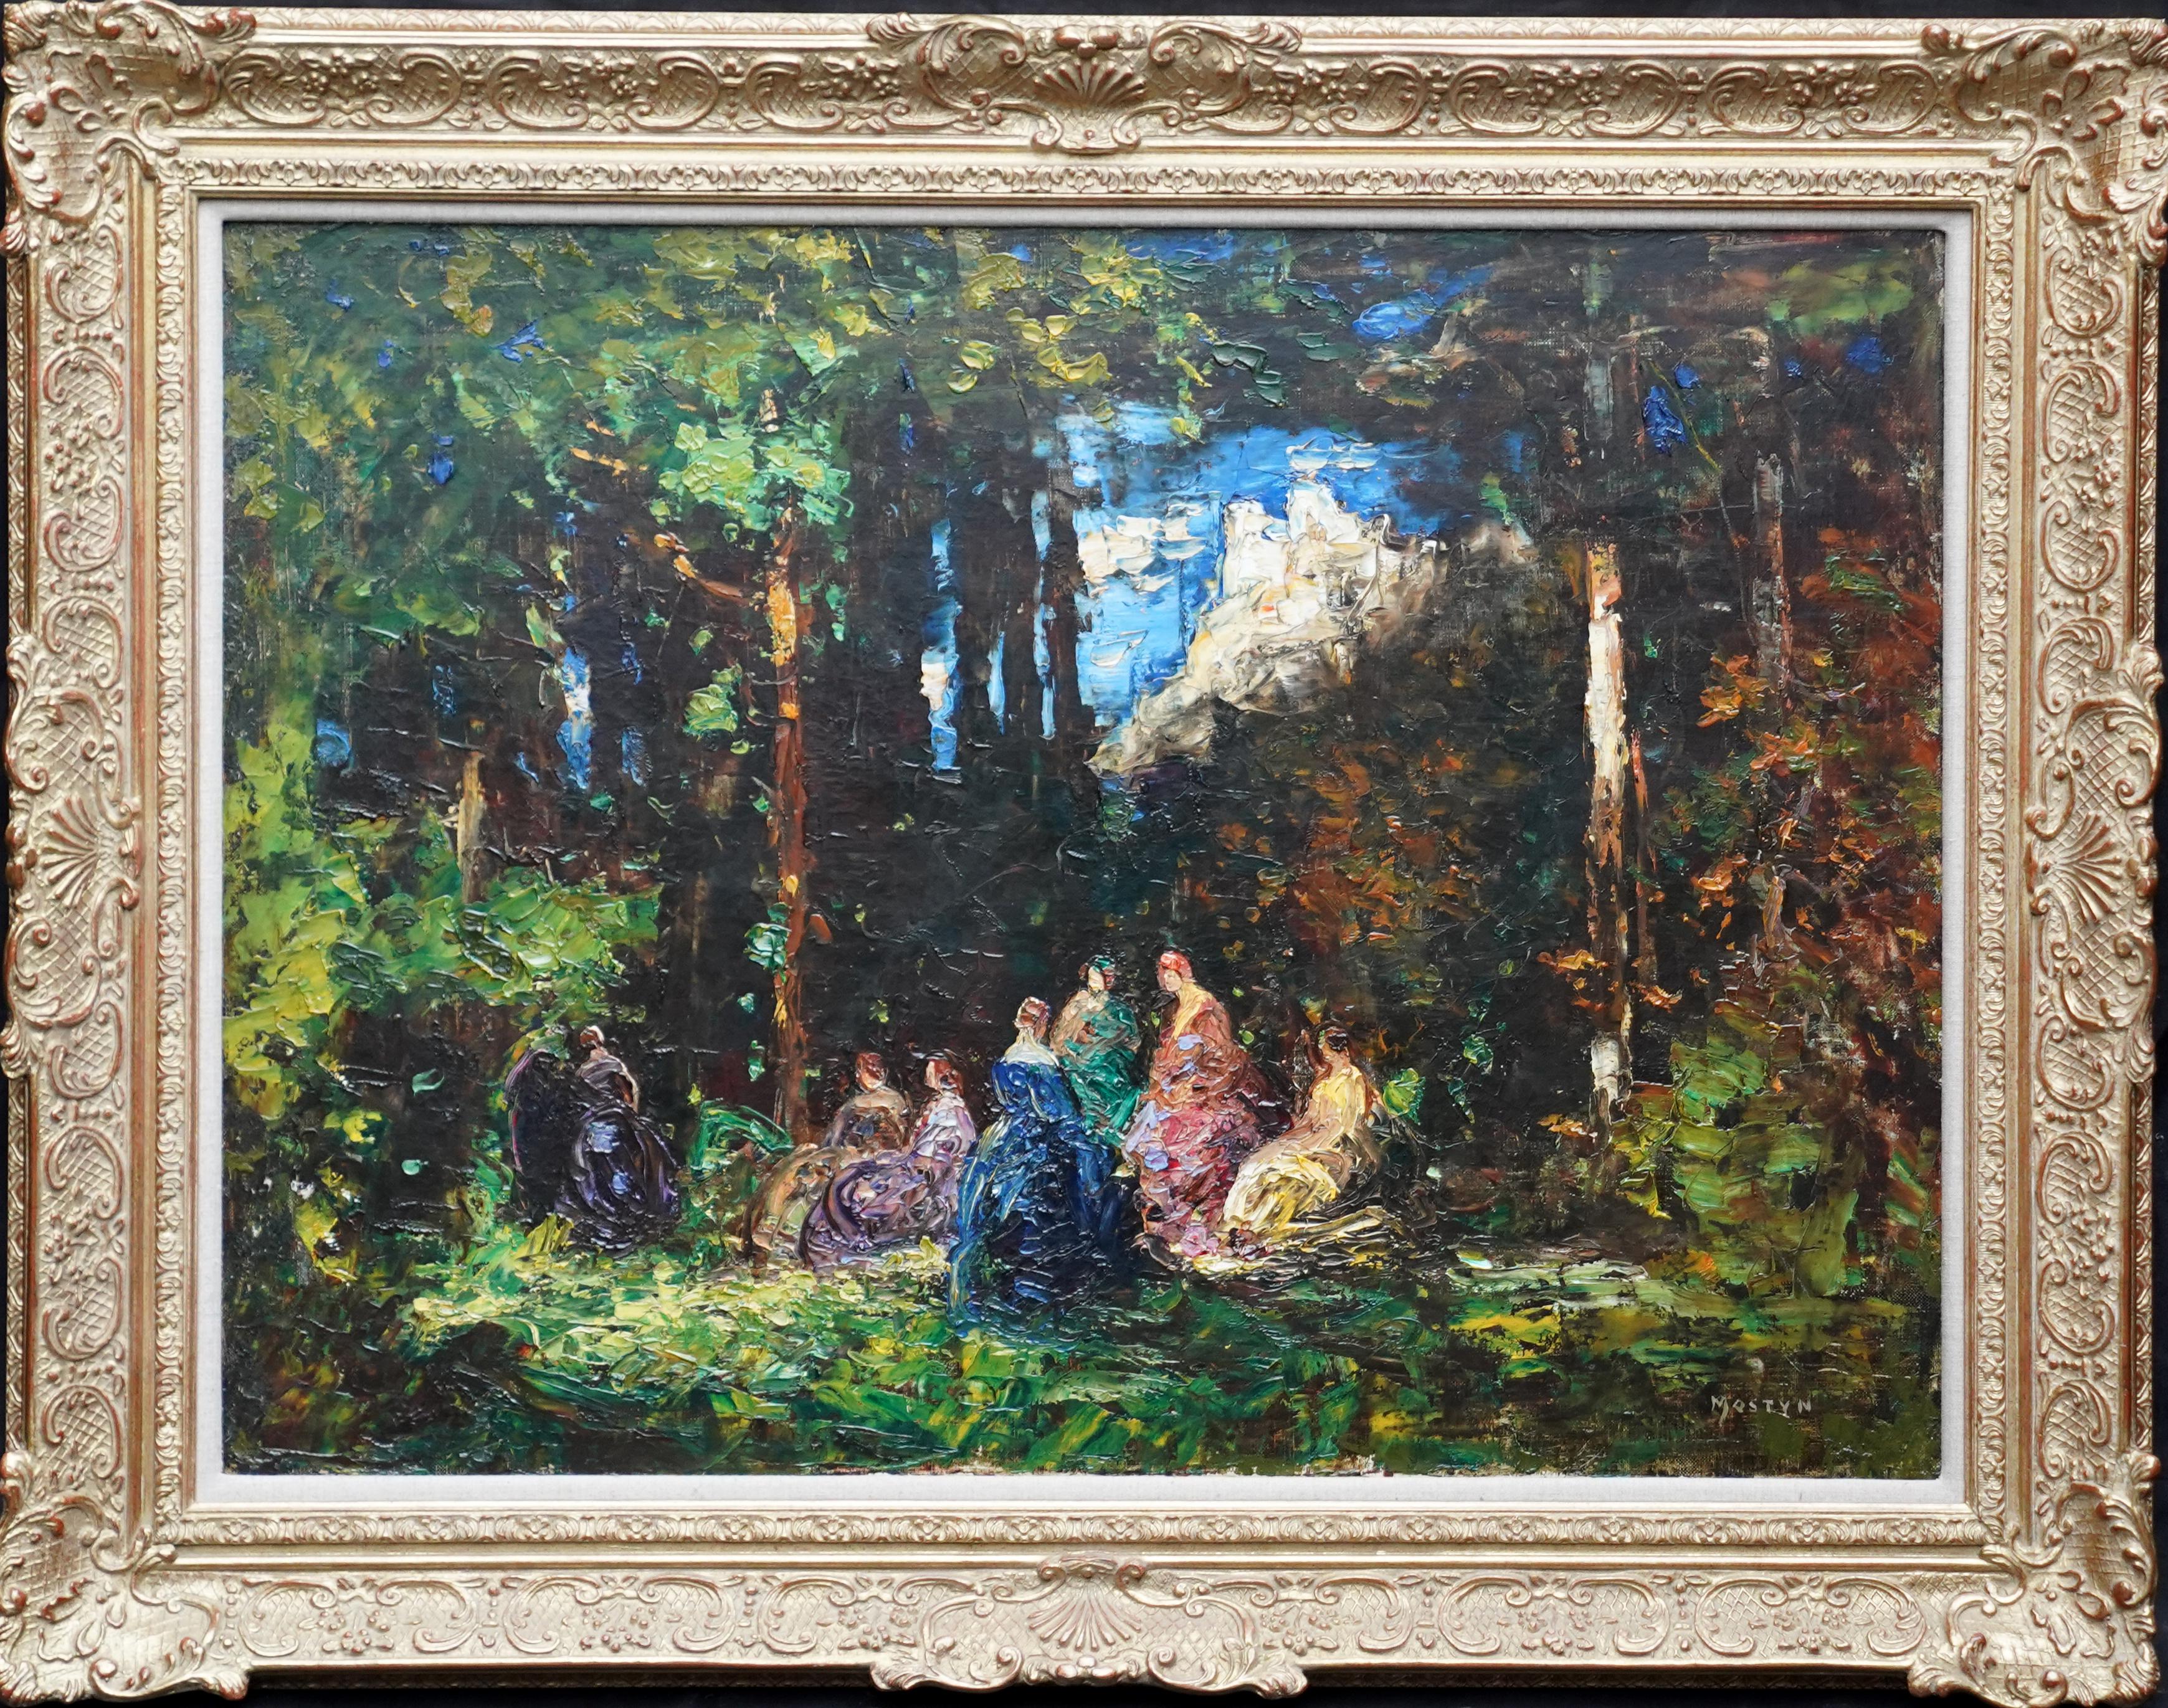 Elegant Ladies in a Woodland Clearing - British Edwardian landscape oil painting 3